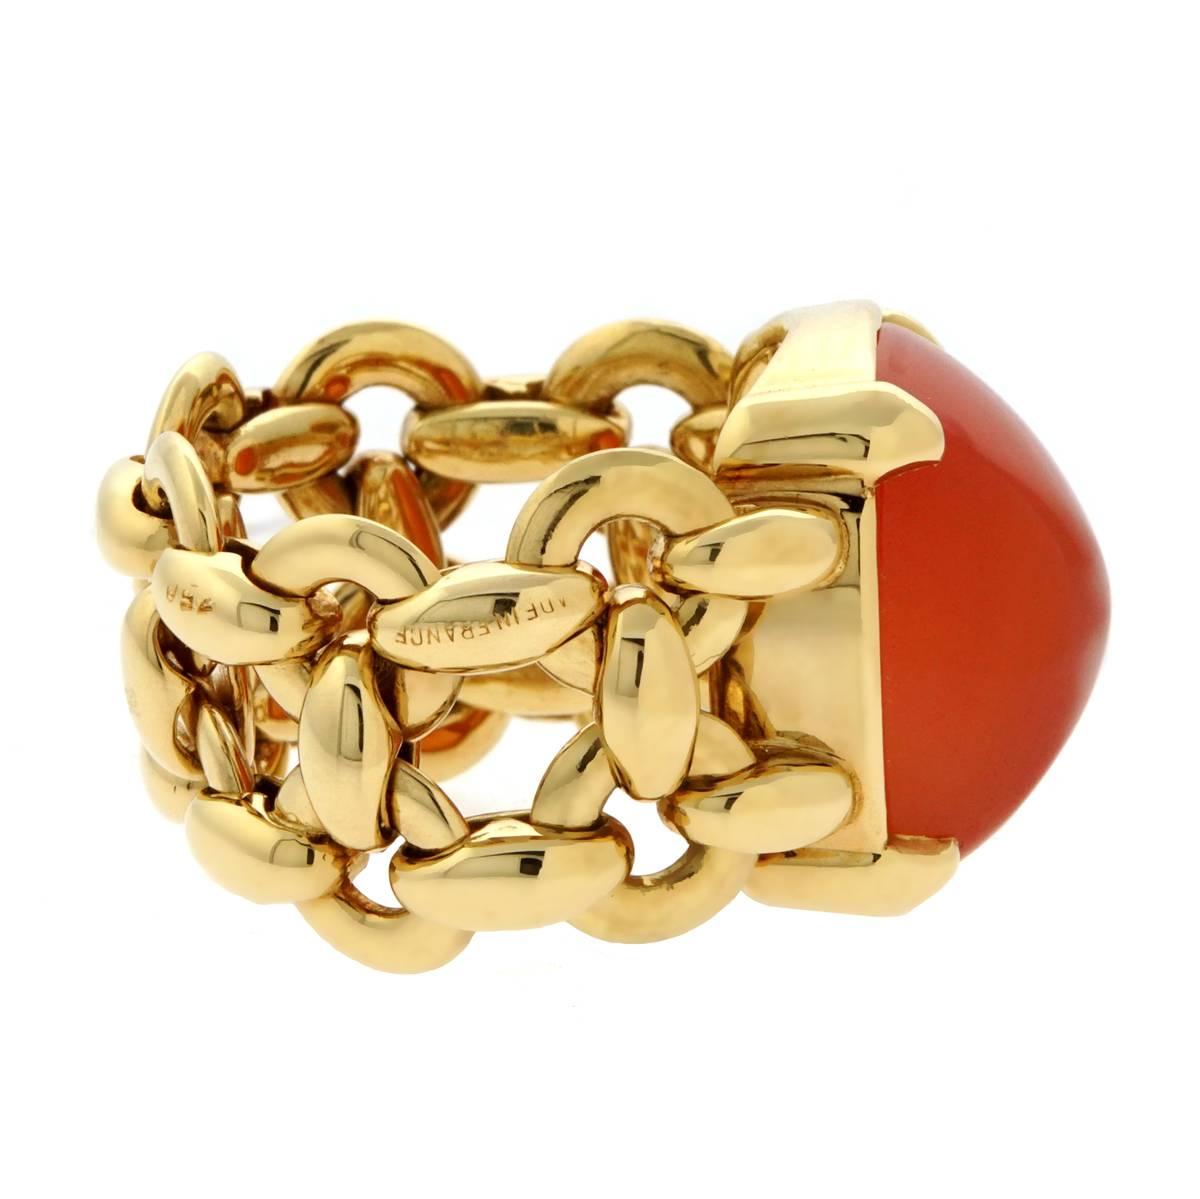 A fantastic Hermes chain link design ring in 18k yellow gold featuring a sugar loaf Carnelian. Size 5 3/4 